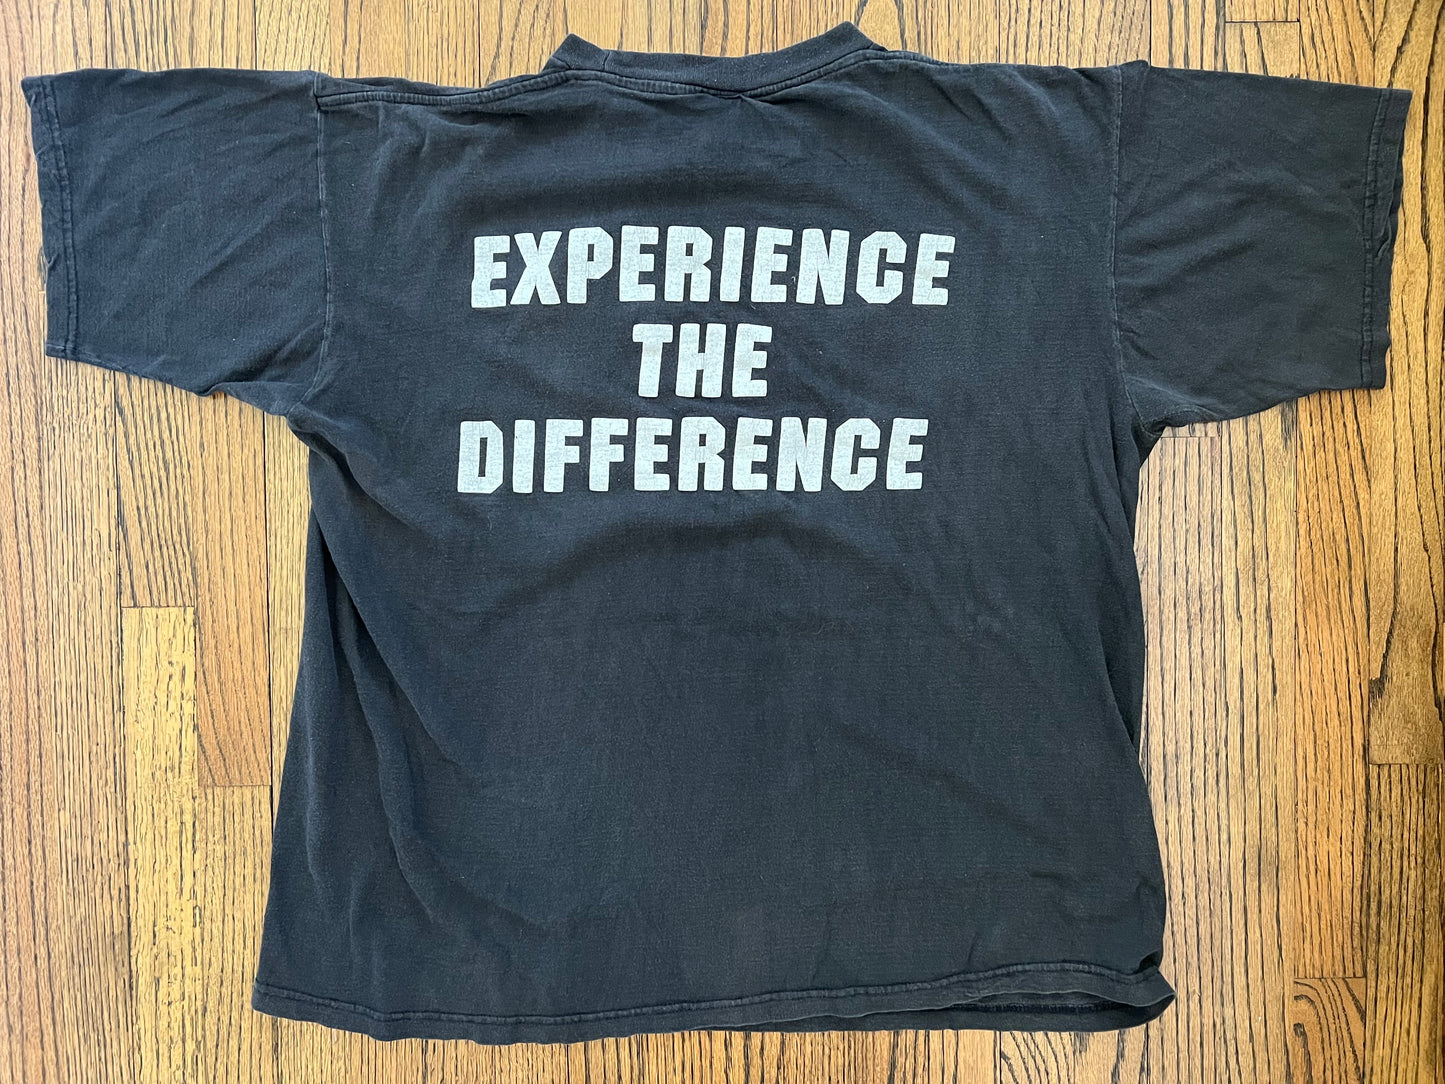 1996 ECW Logo “Experience the Difference” shirt